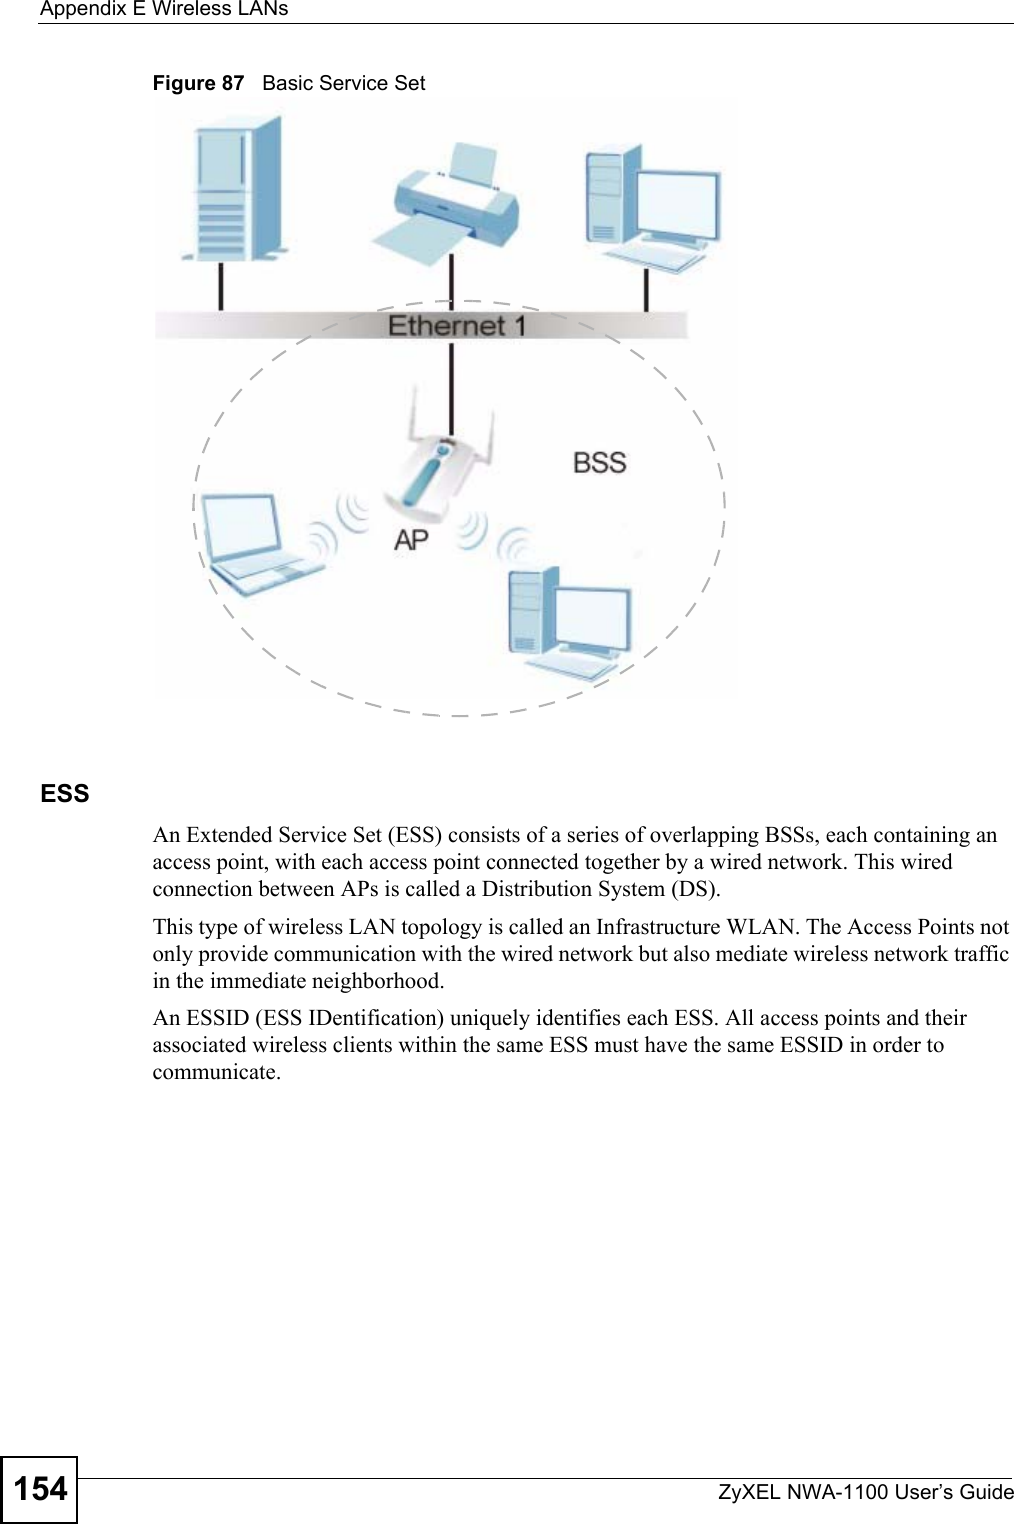 Appendix E Wireless LANsZyXEL NWA-1100 User’s Guide154Figure 87   Basic Service SetESSAn Extended Service Set (ESS) consists of a series of overlapping BSSs, each containing an access point, with each access point connected together by a wired network. This wired connection between APs is called a Distribution System (DS).This type of wireless LAN topology is called an Infrastructure WLAN. The Access Points not only provide communication with the wired network but also mediate wireless network traffic in the immediate neighborhood. An ESSID (ESS IDentification) uniquely identifies each ESS. All access points and their associated wireless clients within the same ESS must have the same ESSID in order to communicate.